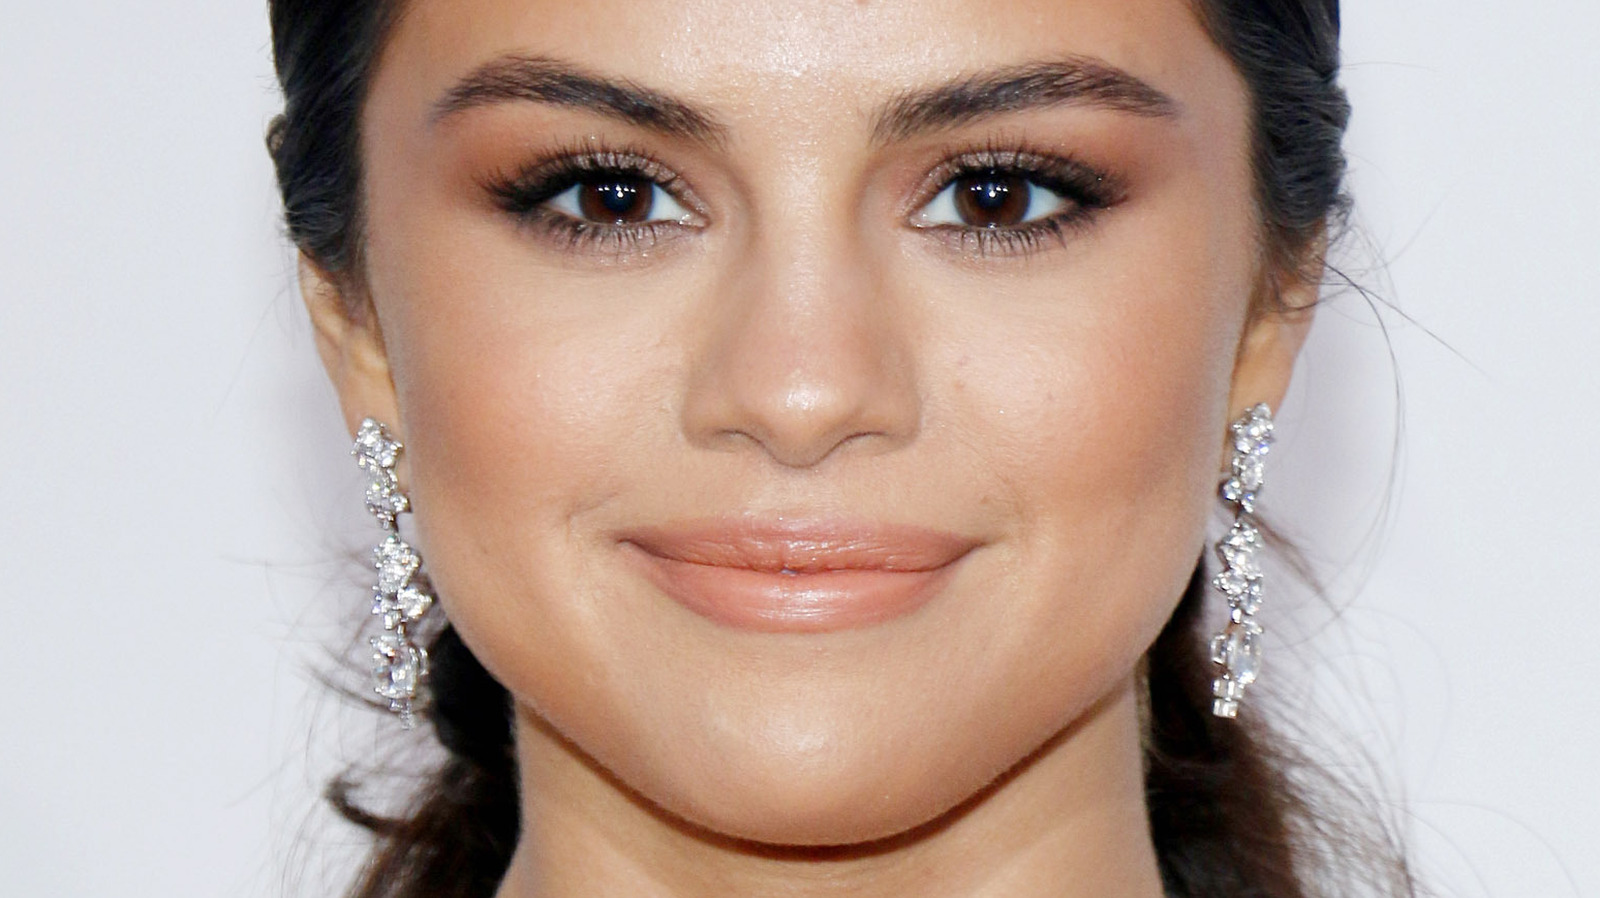 Selena Gomez Is Still Hoping to “Keep Up” With Her Only Murders in the  Building Co-Stars